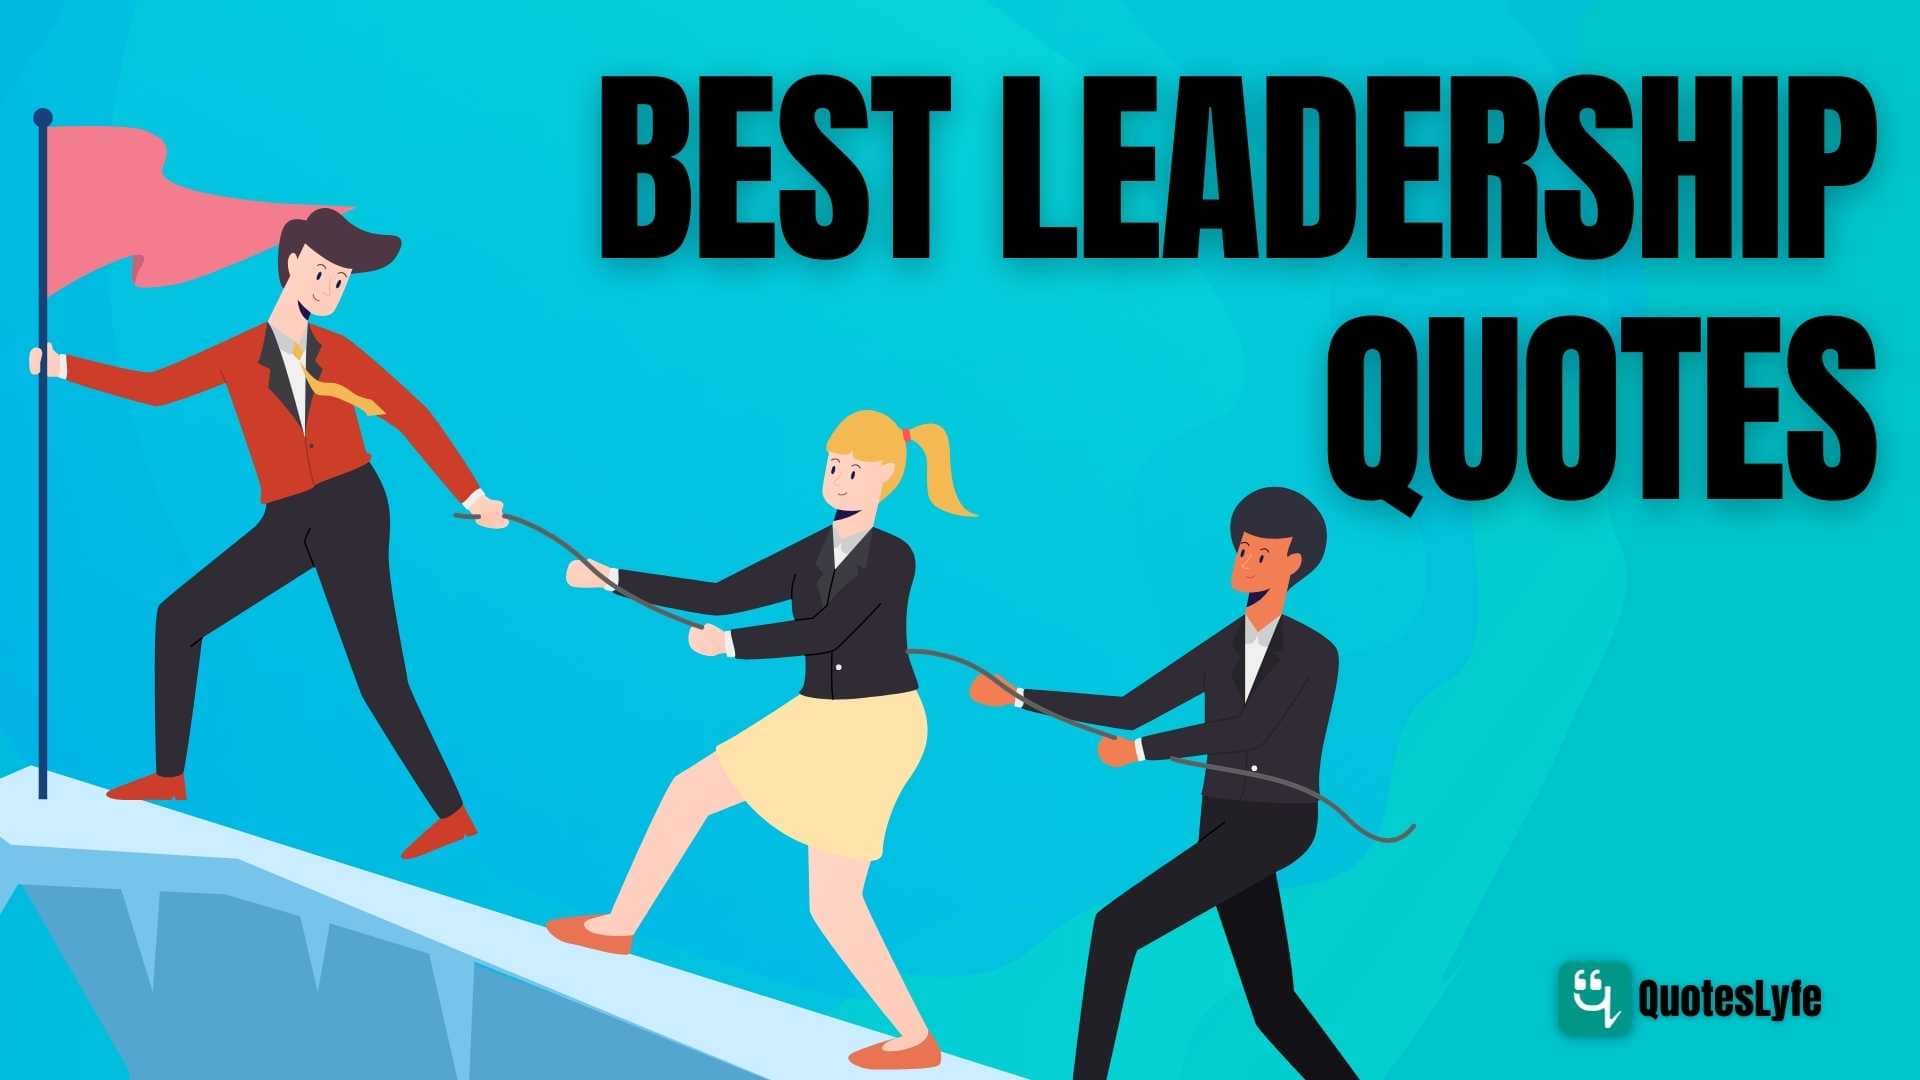 Best Leadership Quotes to Bring Out the Leader Within You